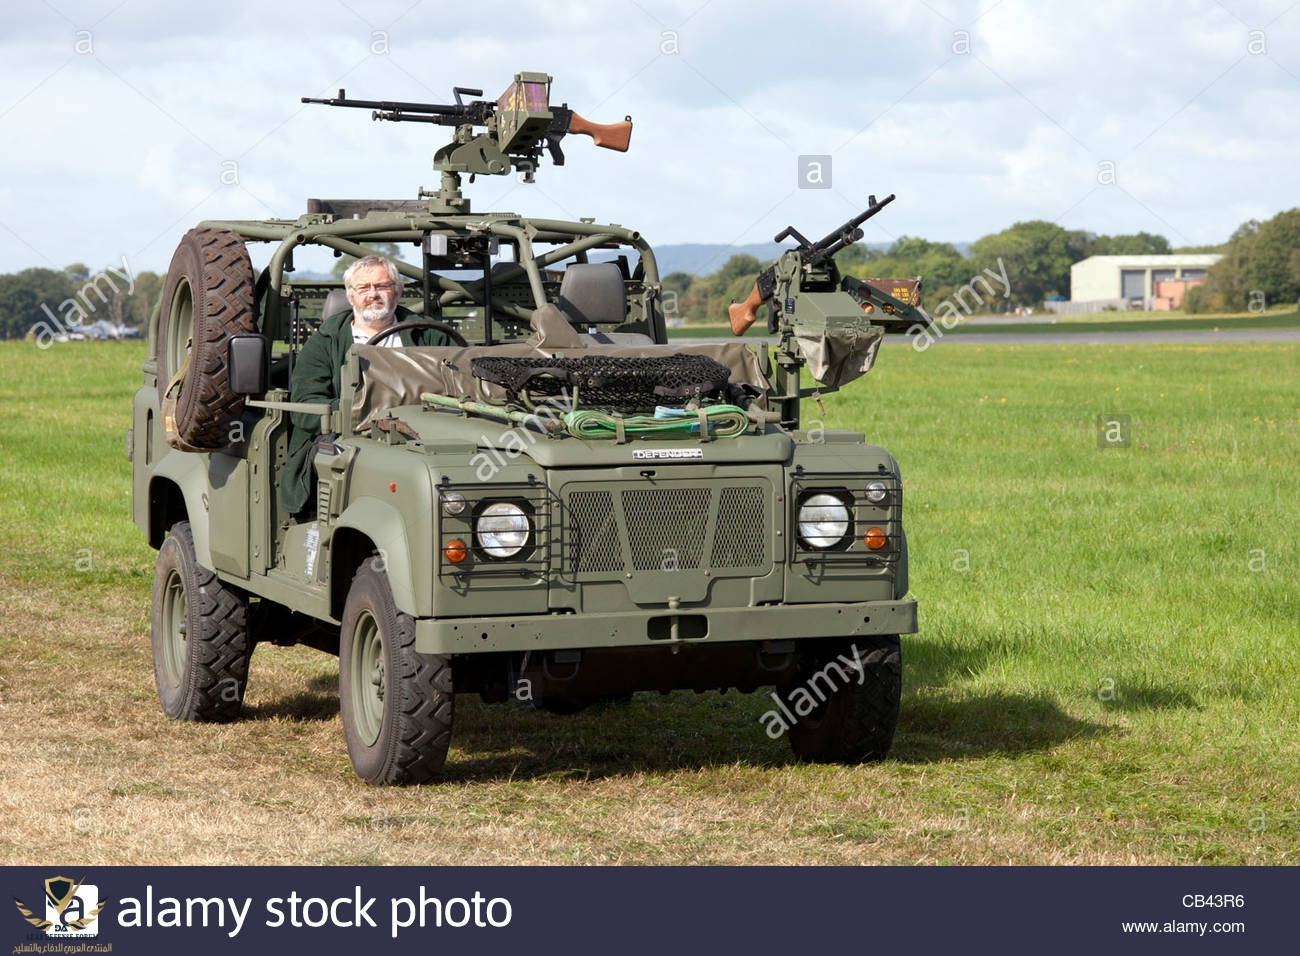 land-rover-defender-in-the-military-parade-at-dunsfold-wings-and-wheels-CB43R6.jpg